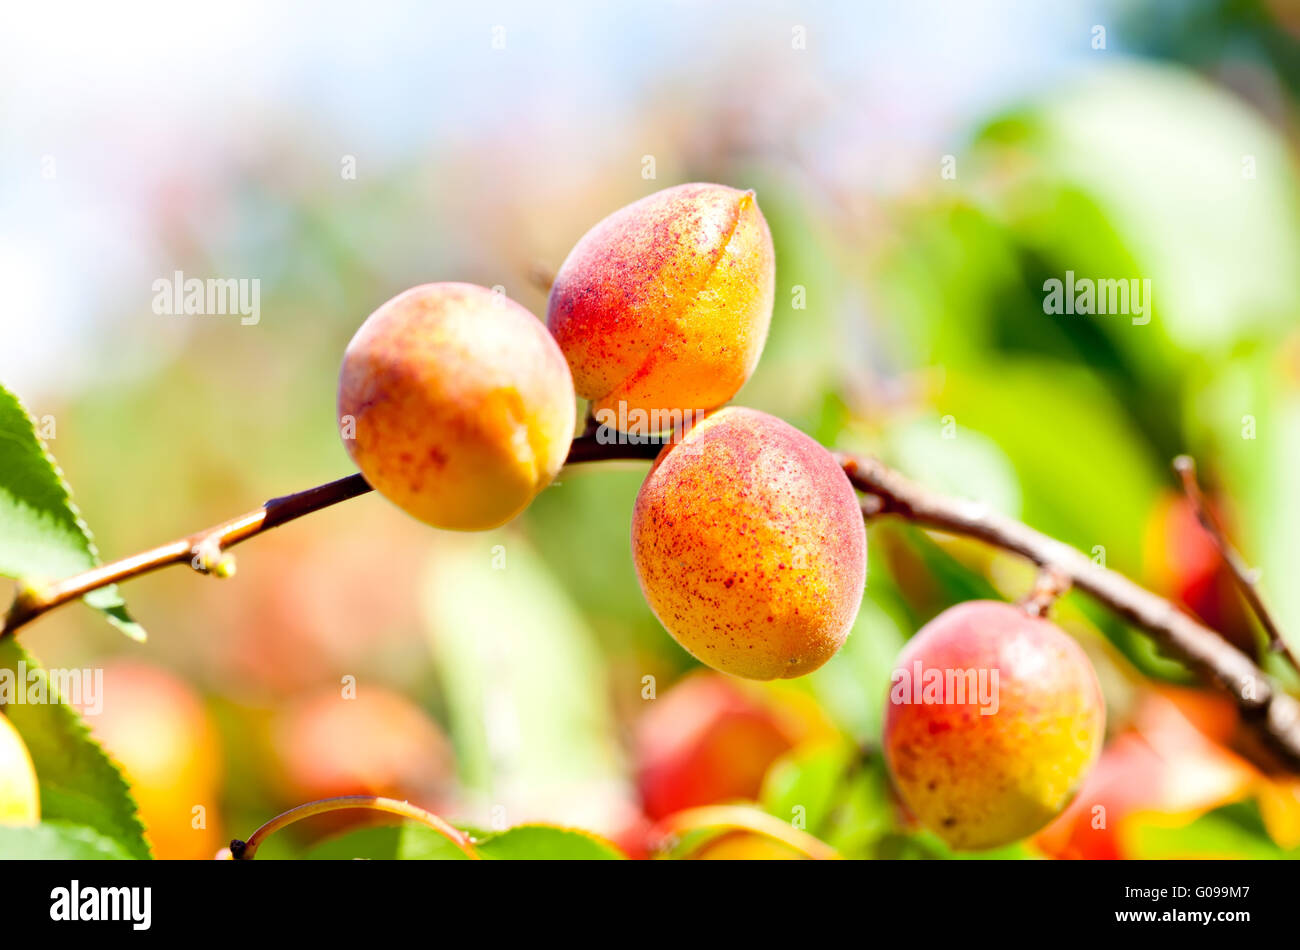 Ripe apricots on a branch among green leaves in summer Stock Photo